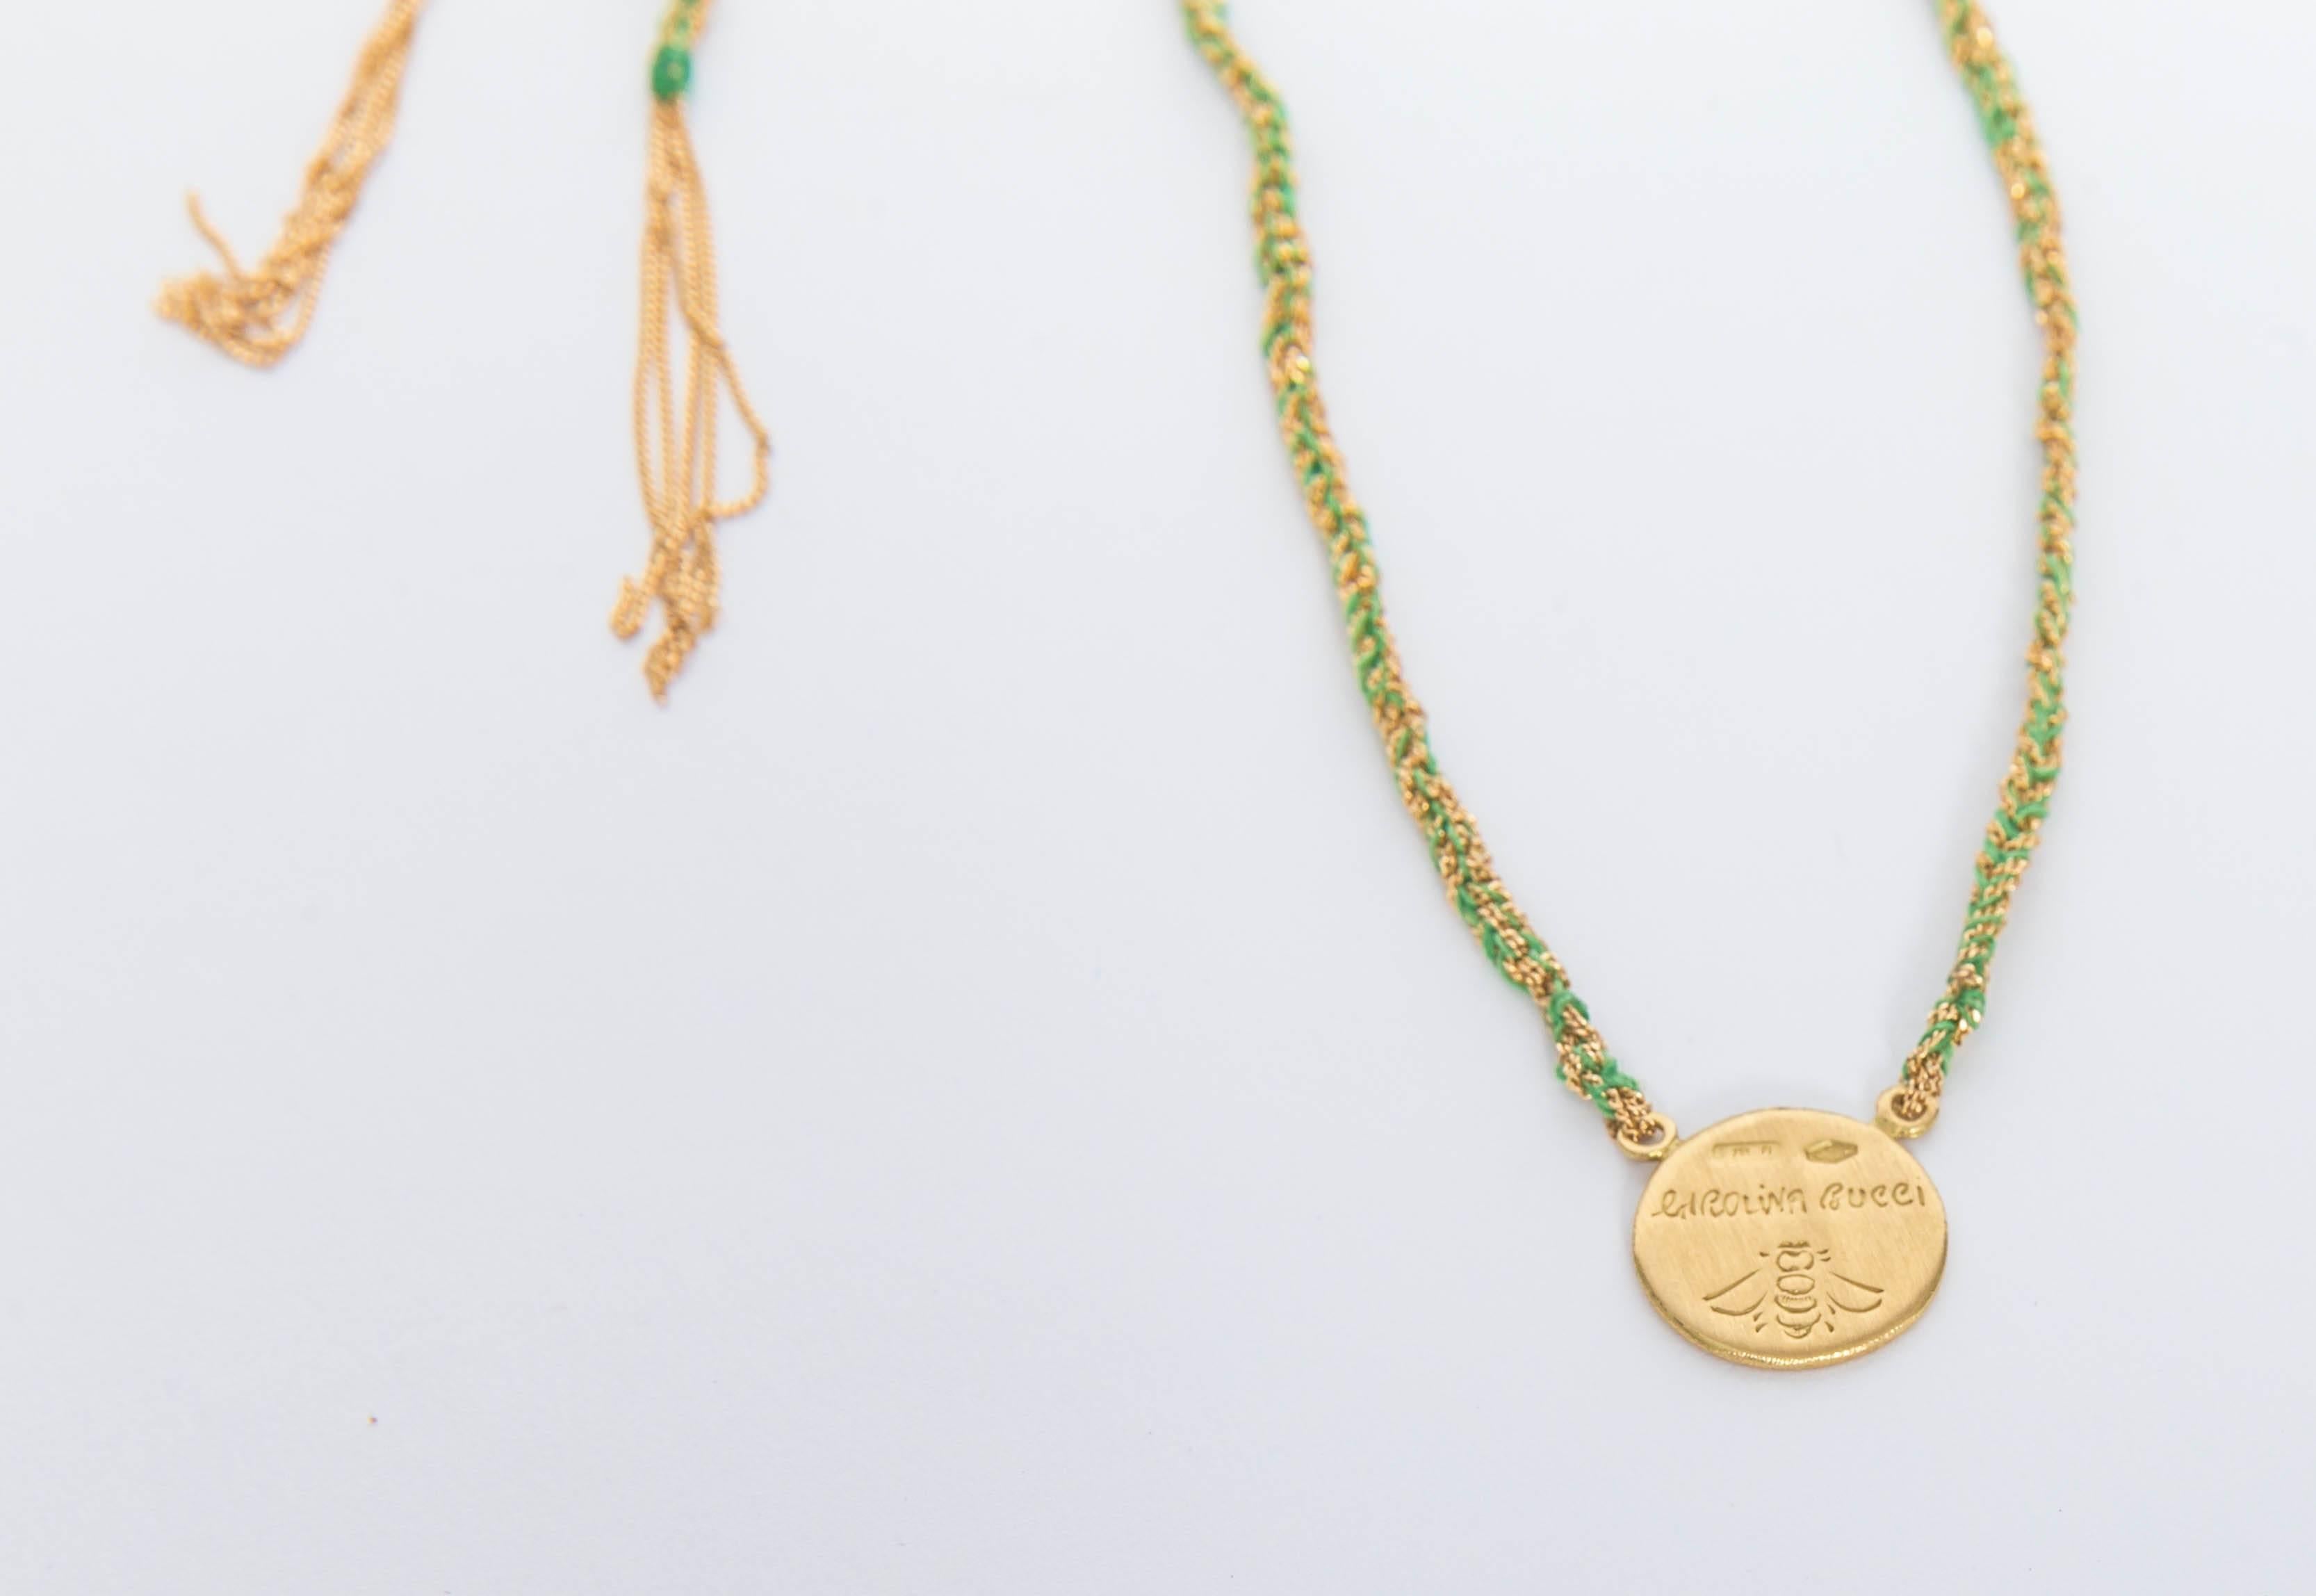 Carolina Bucci 18 kt Gold and Silk $ Money Pendant Necklace / Lariat 
This beautiful necklace features a gold disc with a dollar sign outlined in diamonds.
Stunning 18 kt Yellow Gold diamond-cut chain, hand braided with Apple Green silk ends in gold